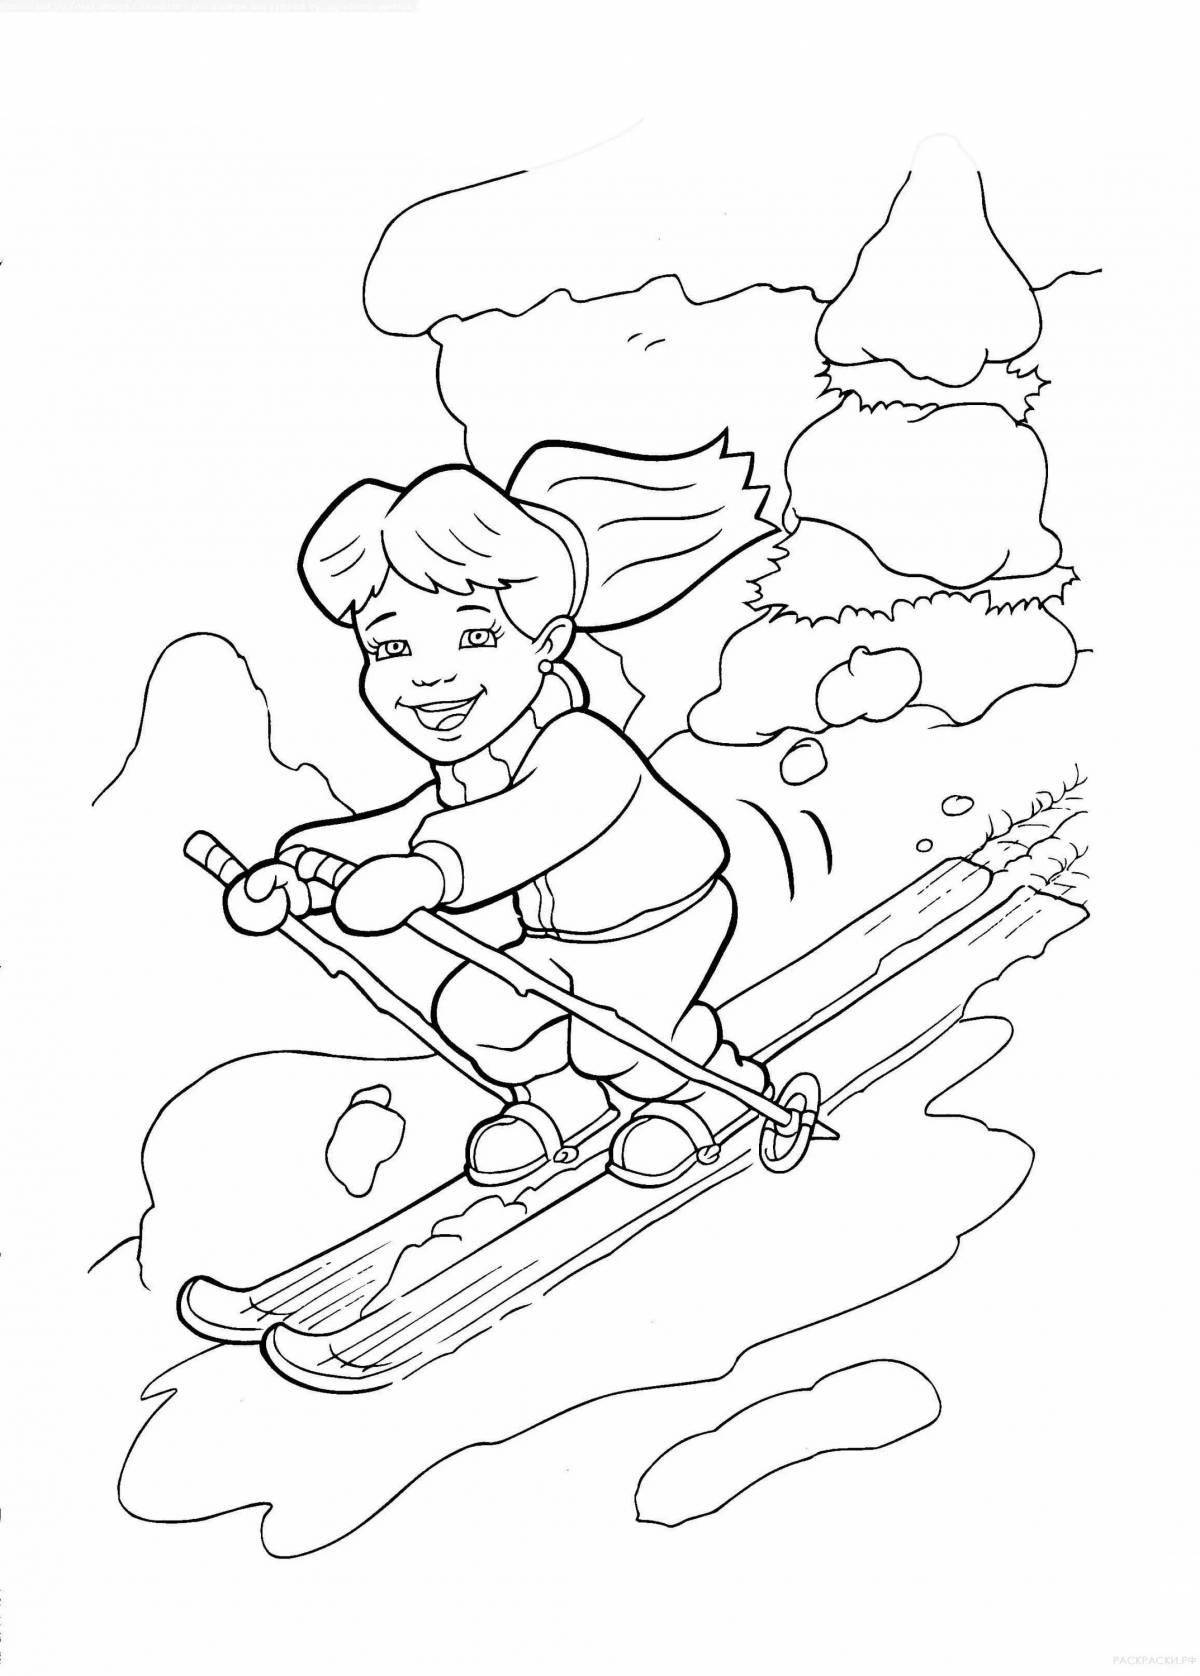 Bright skier coloring book for kids